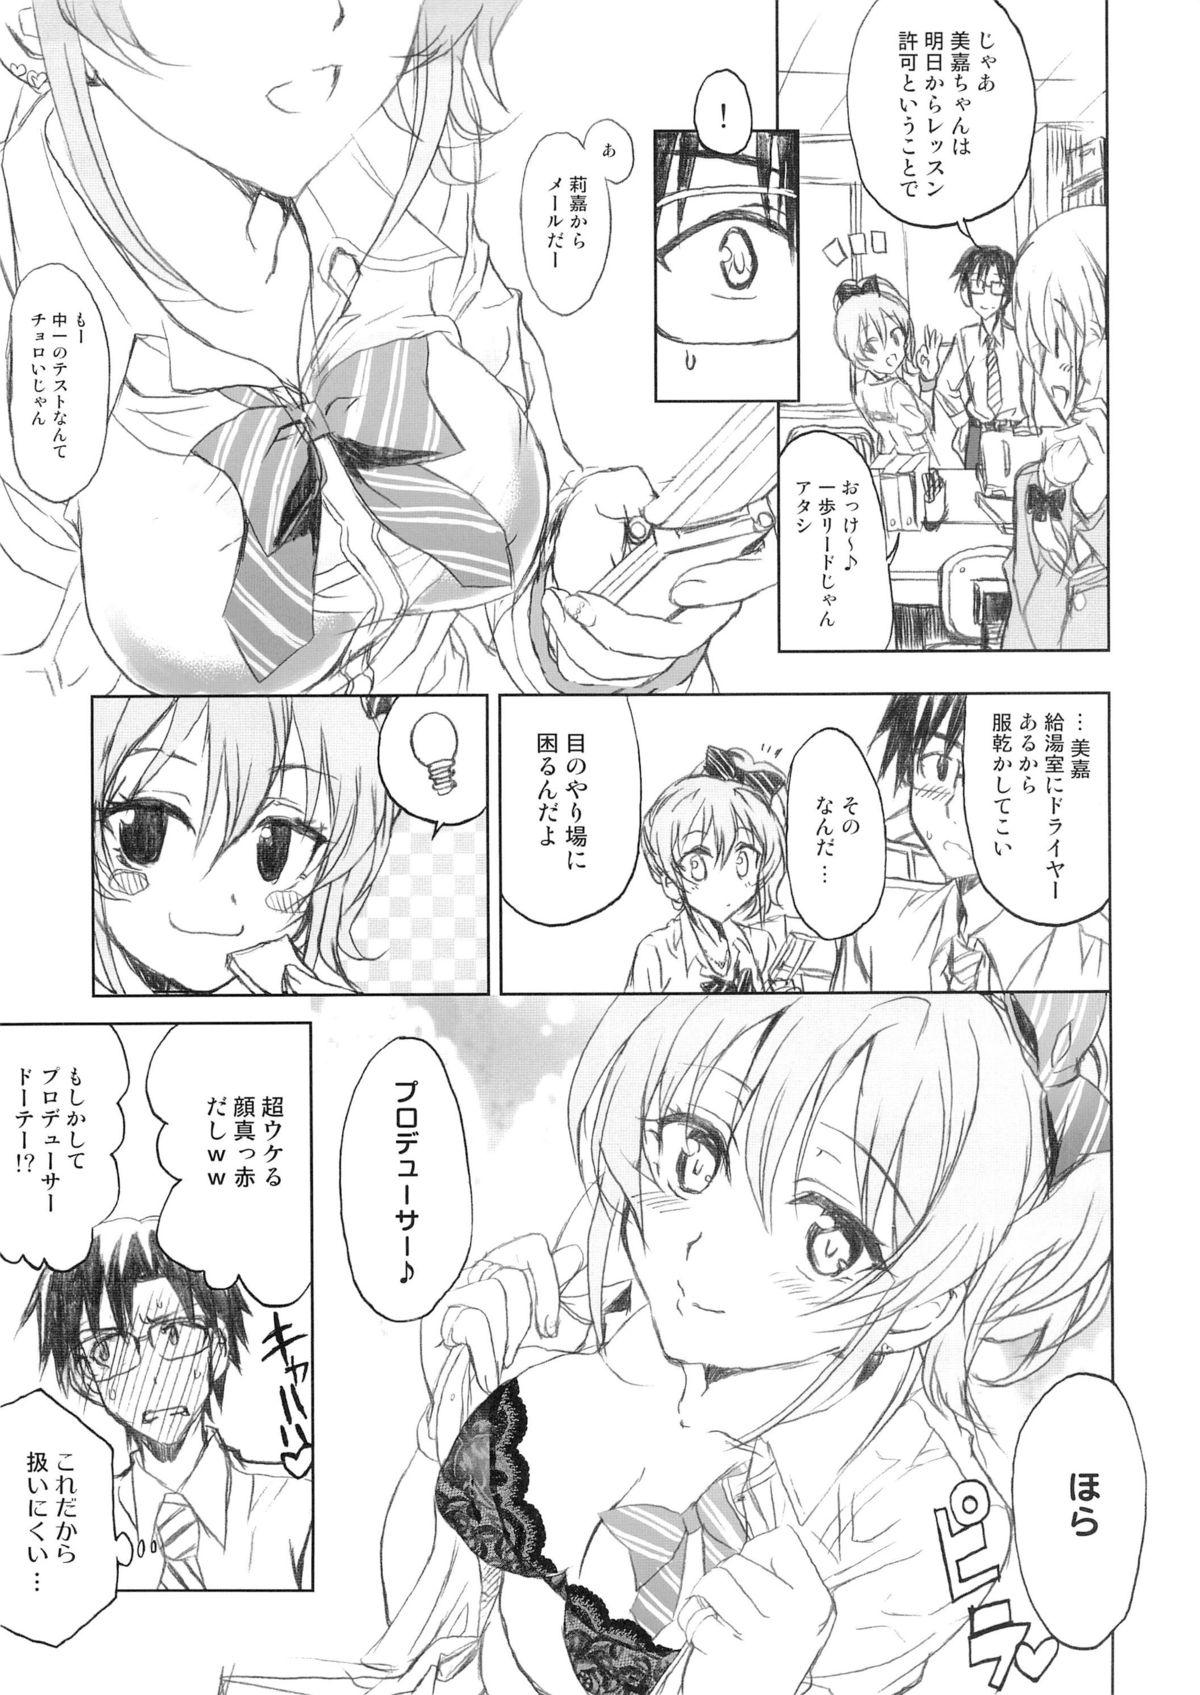 Wives PASSION FRUITS GIRLS #2 "Jougasaki Mika" - The idolmaster Home - Page 10